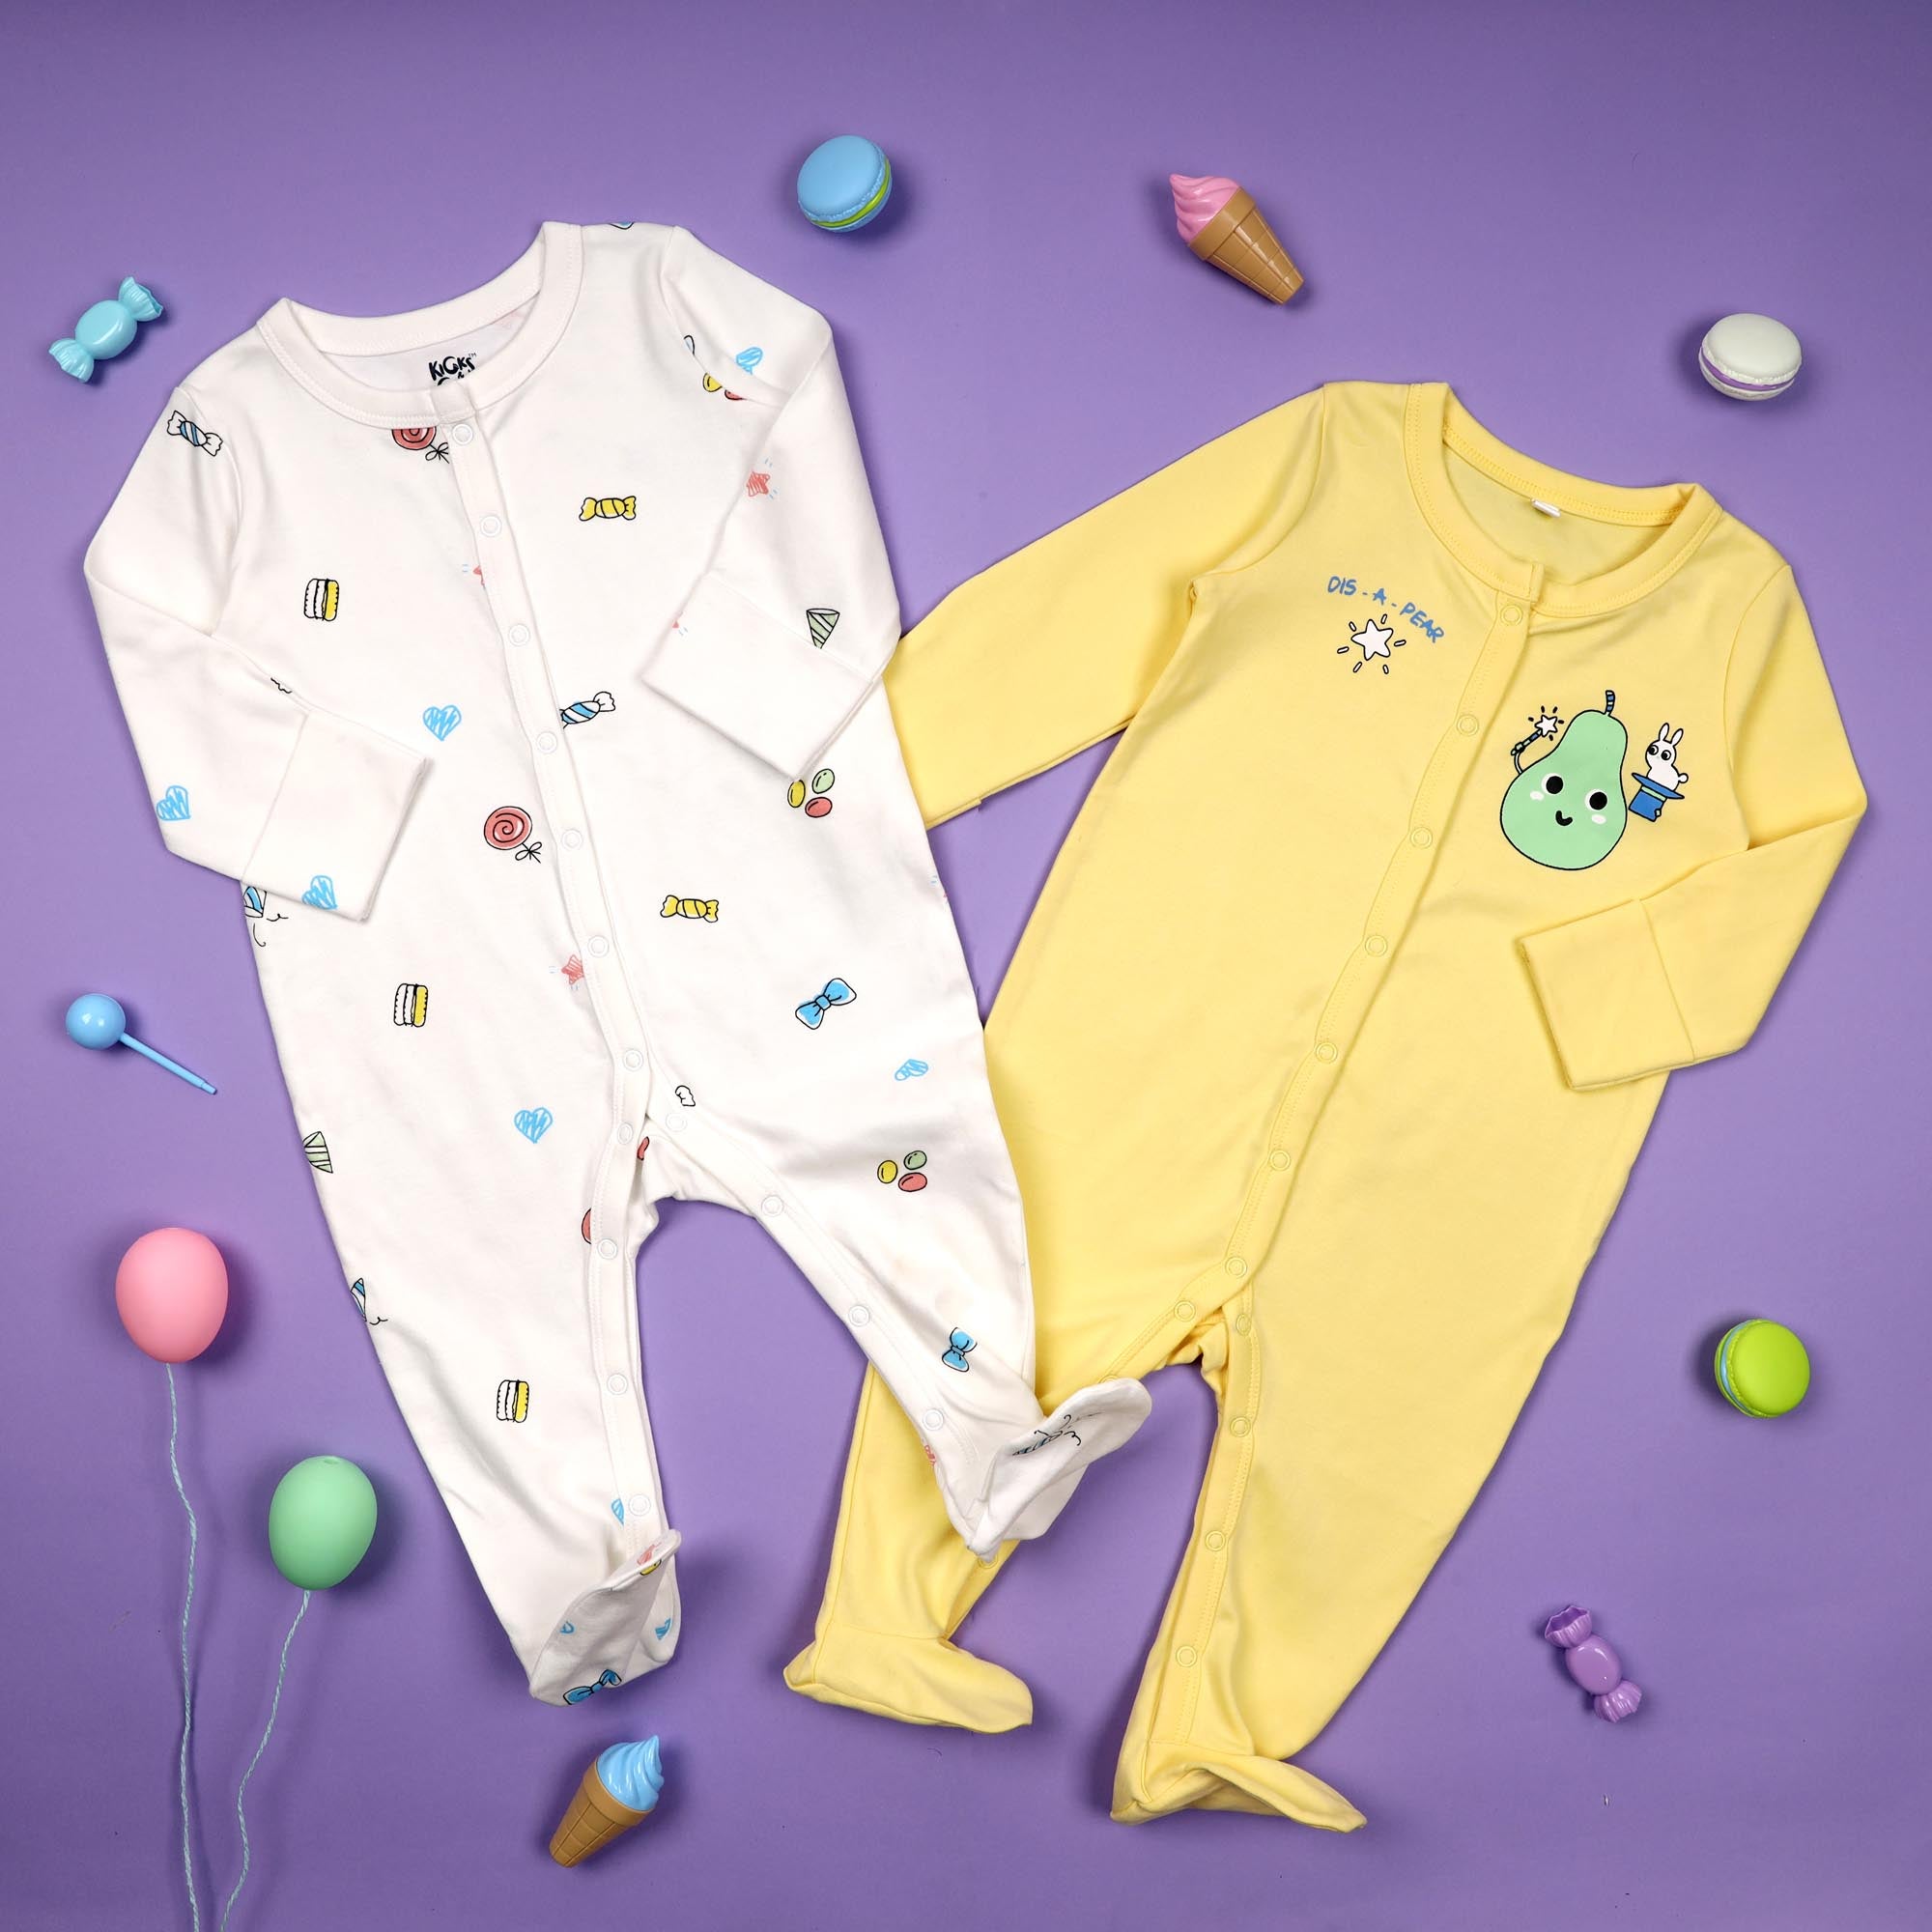 Party Pear Sleepsuits - 2 Pack